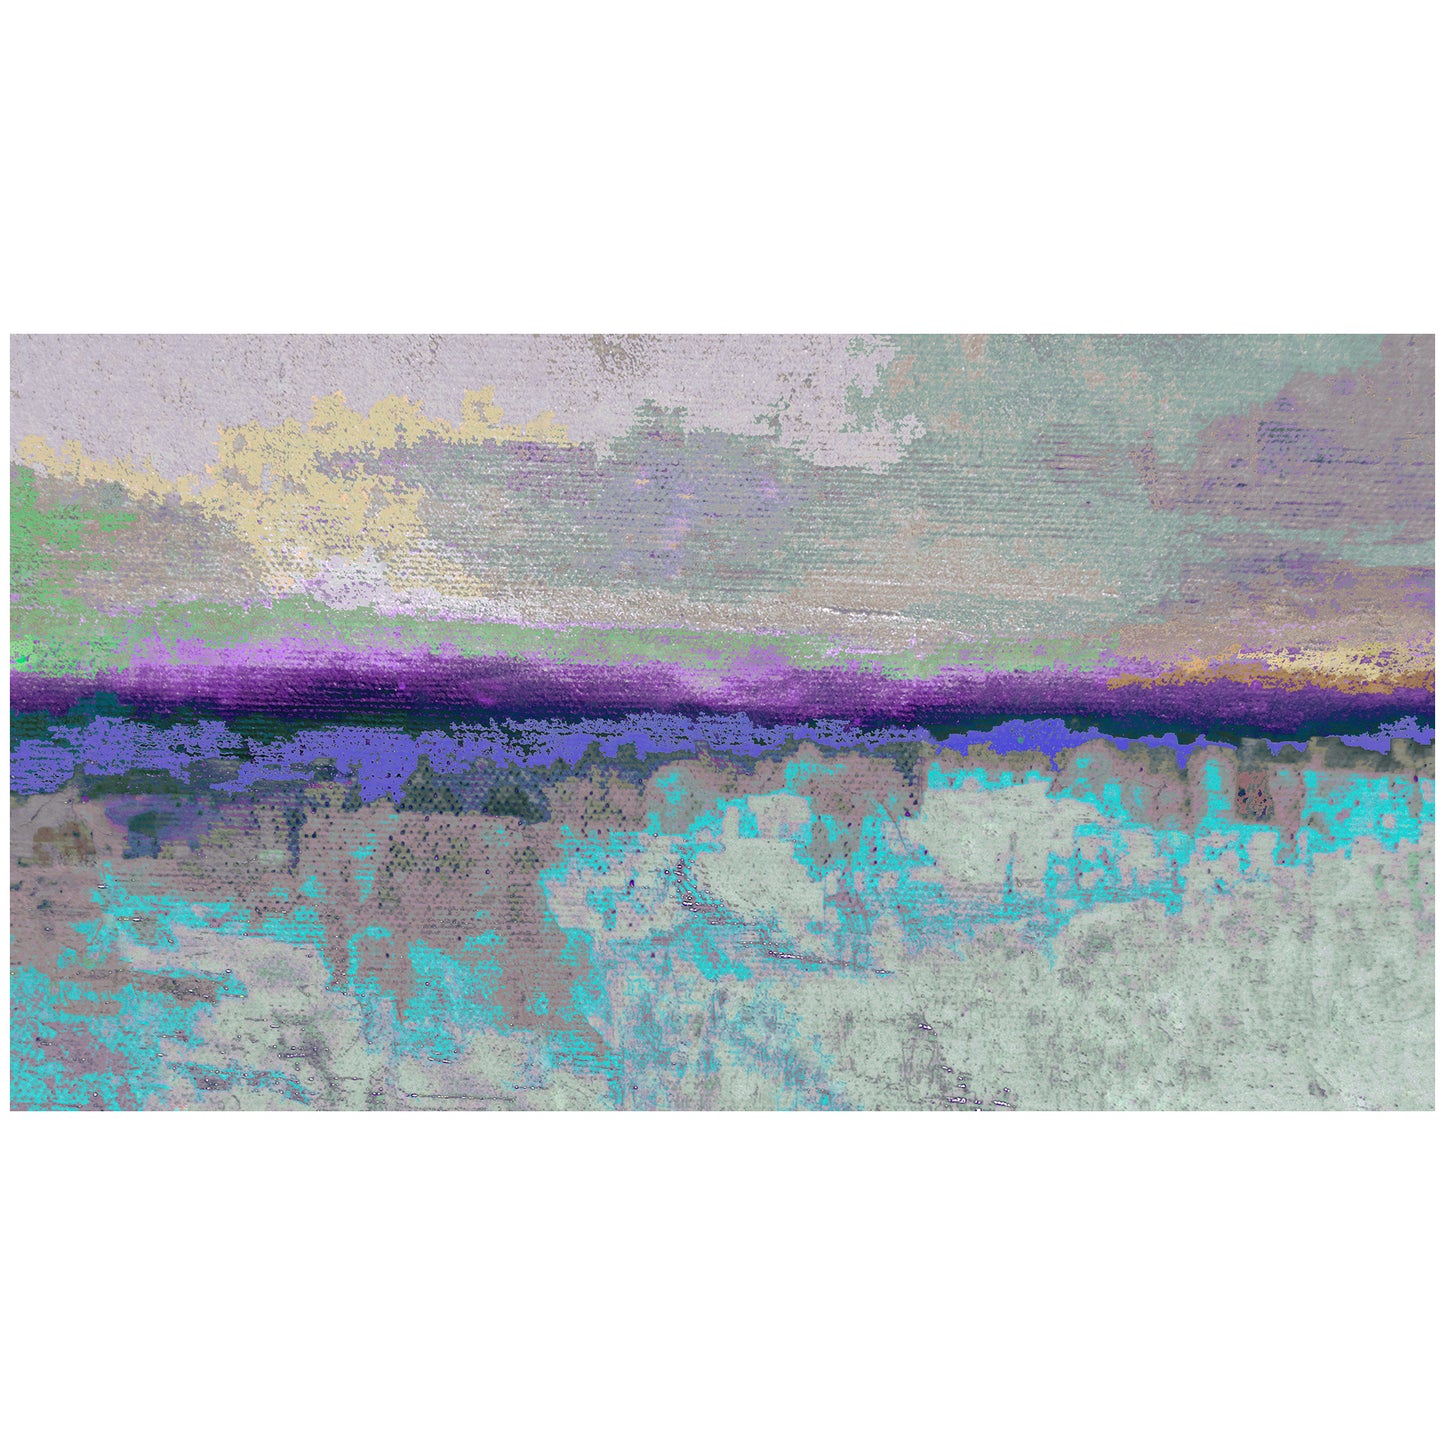 Scadron Terra Scapes 7 Abstract Art Print